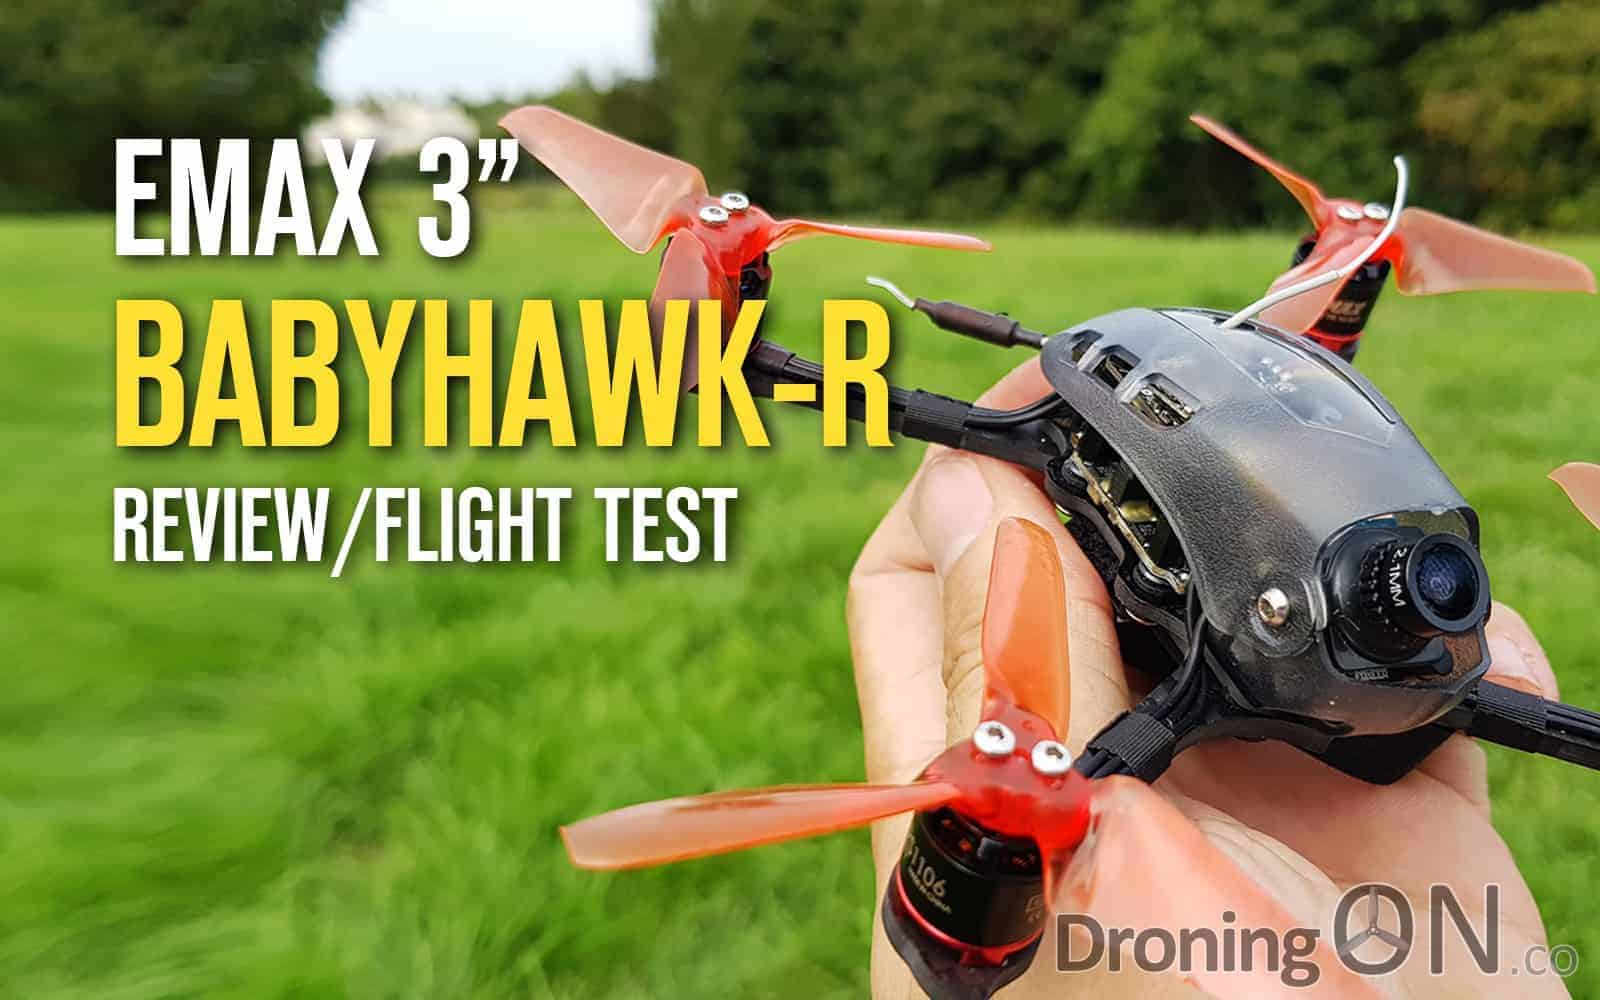 The impressive Emax BabyHawk-R brushless racing quad, with fully featured specification and impressive performance.